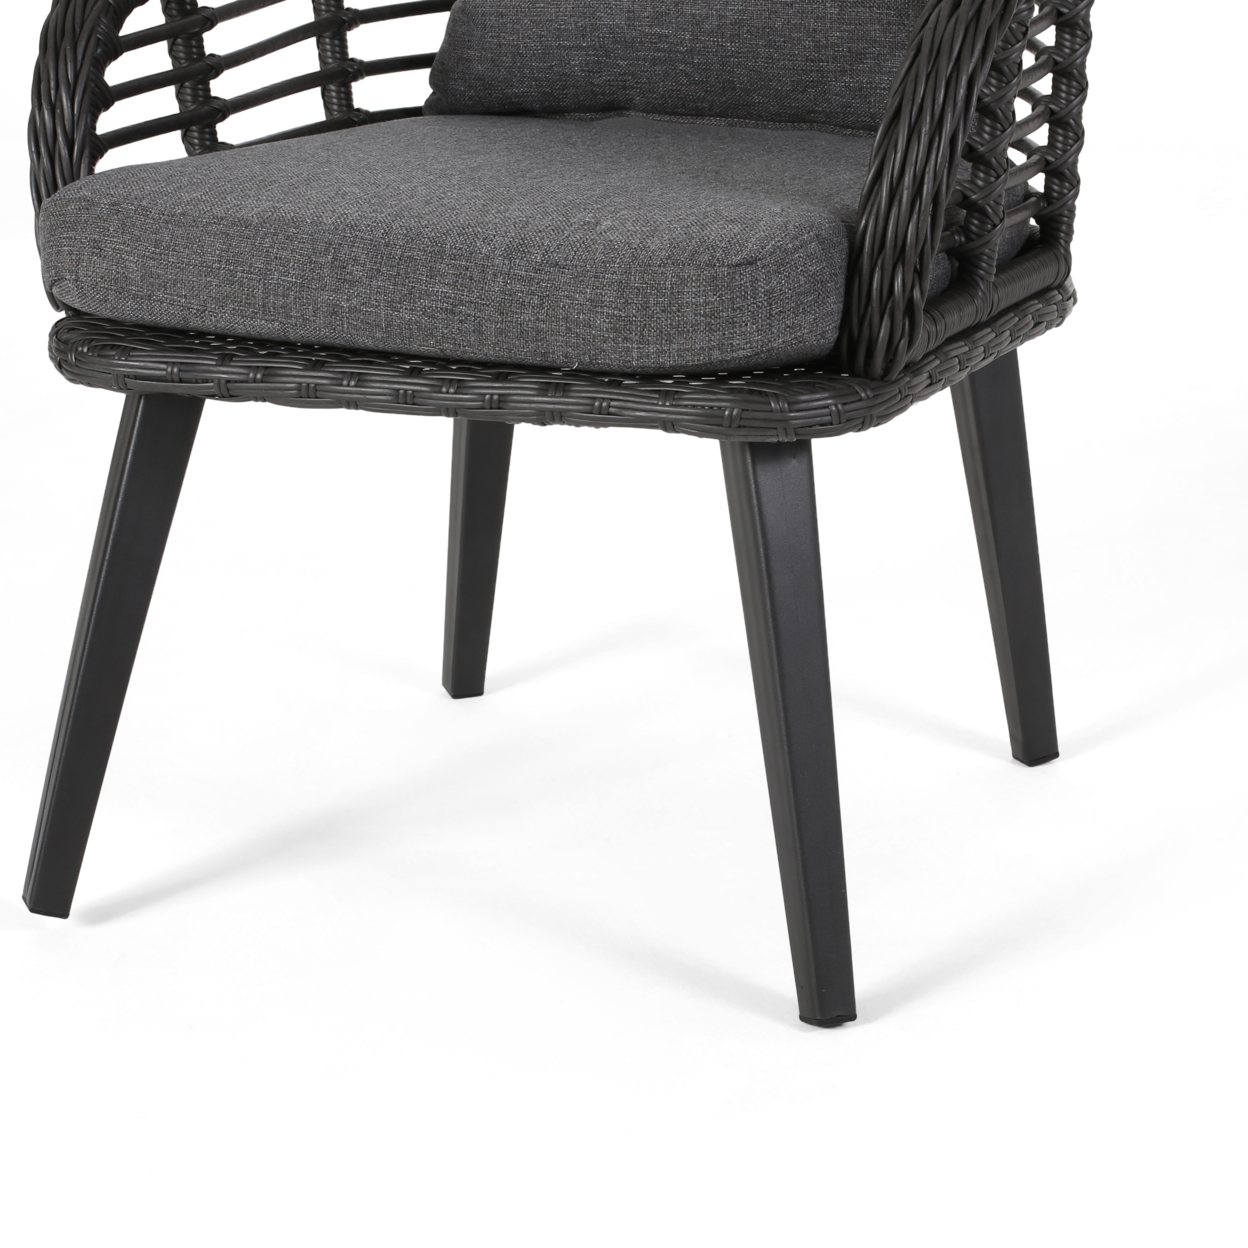 Madison Outdoor Wicker Club Chairs With Cushions (Set Of 2) - Gray, Black, Dark Gray